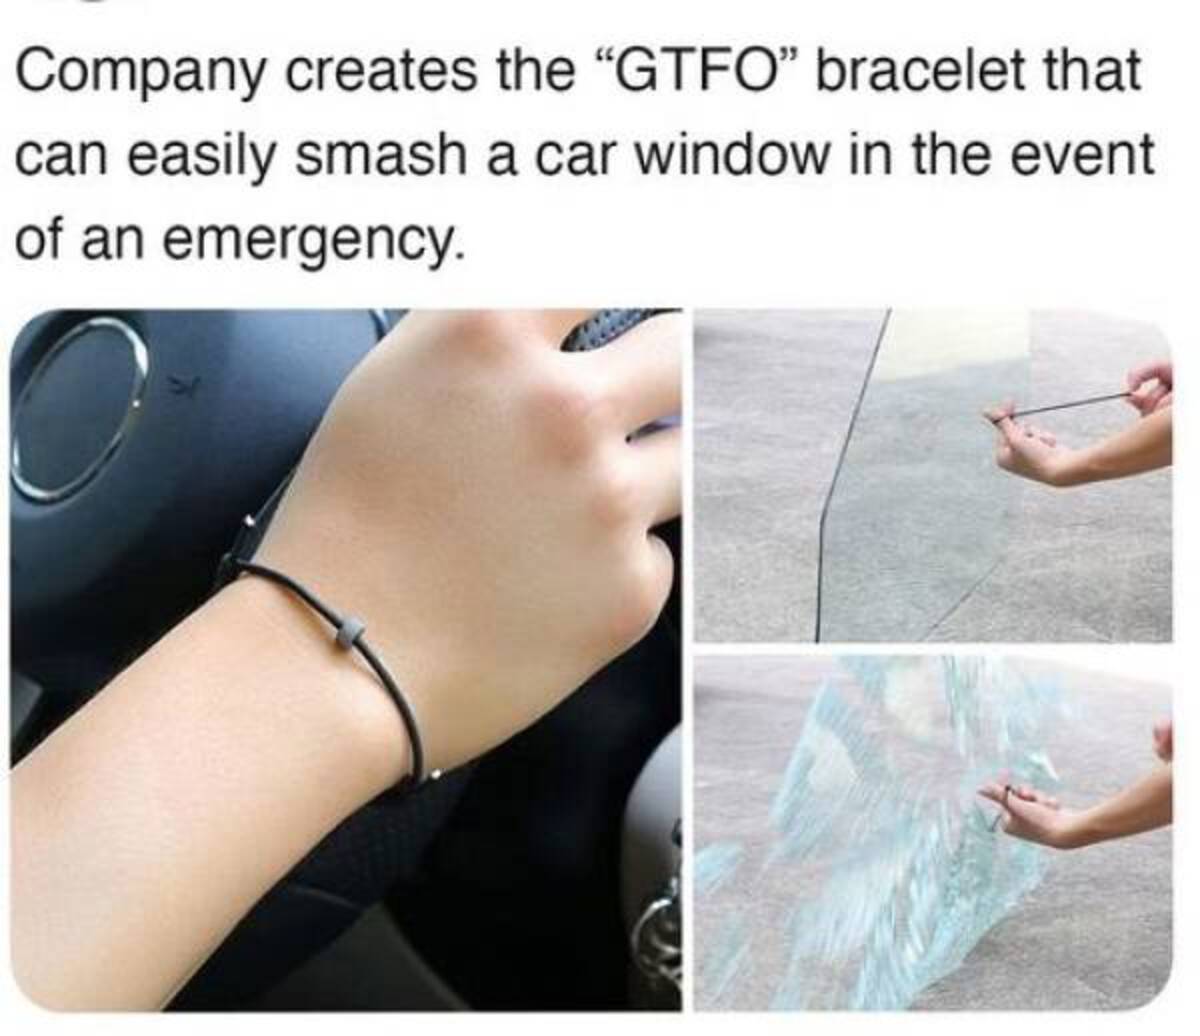 engagement ring - Company creates the "Gtfo" bracelet that can easily smash a car window in the event of an emergency.